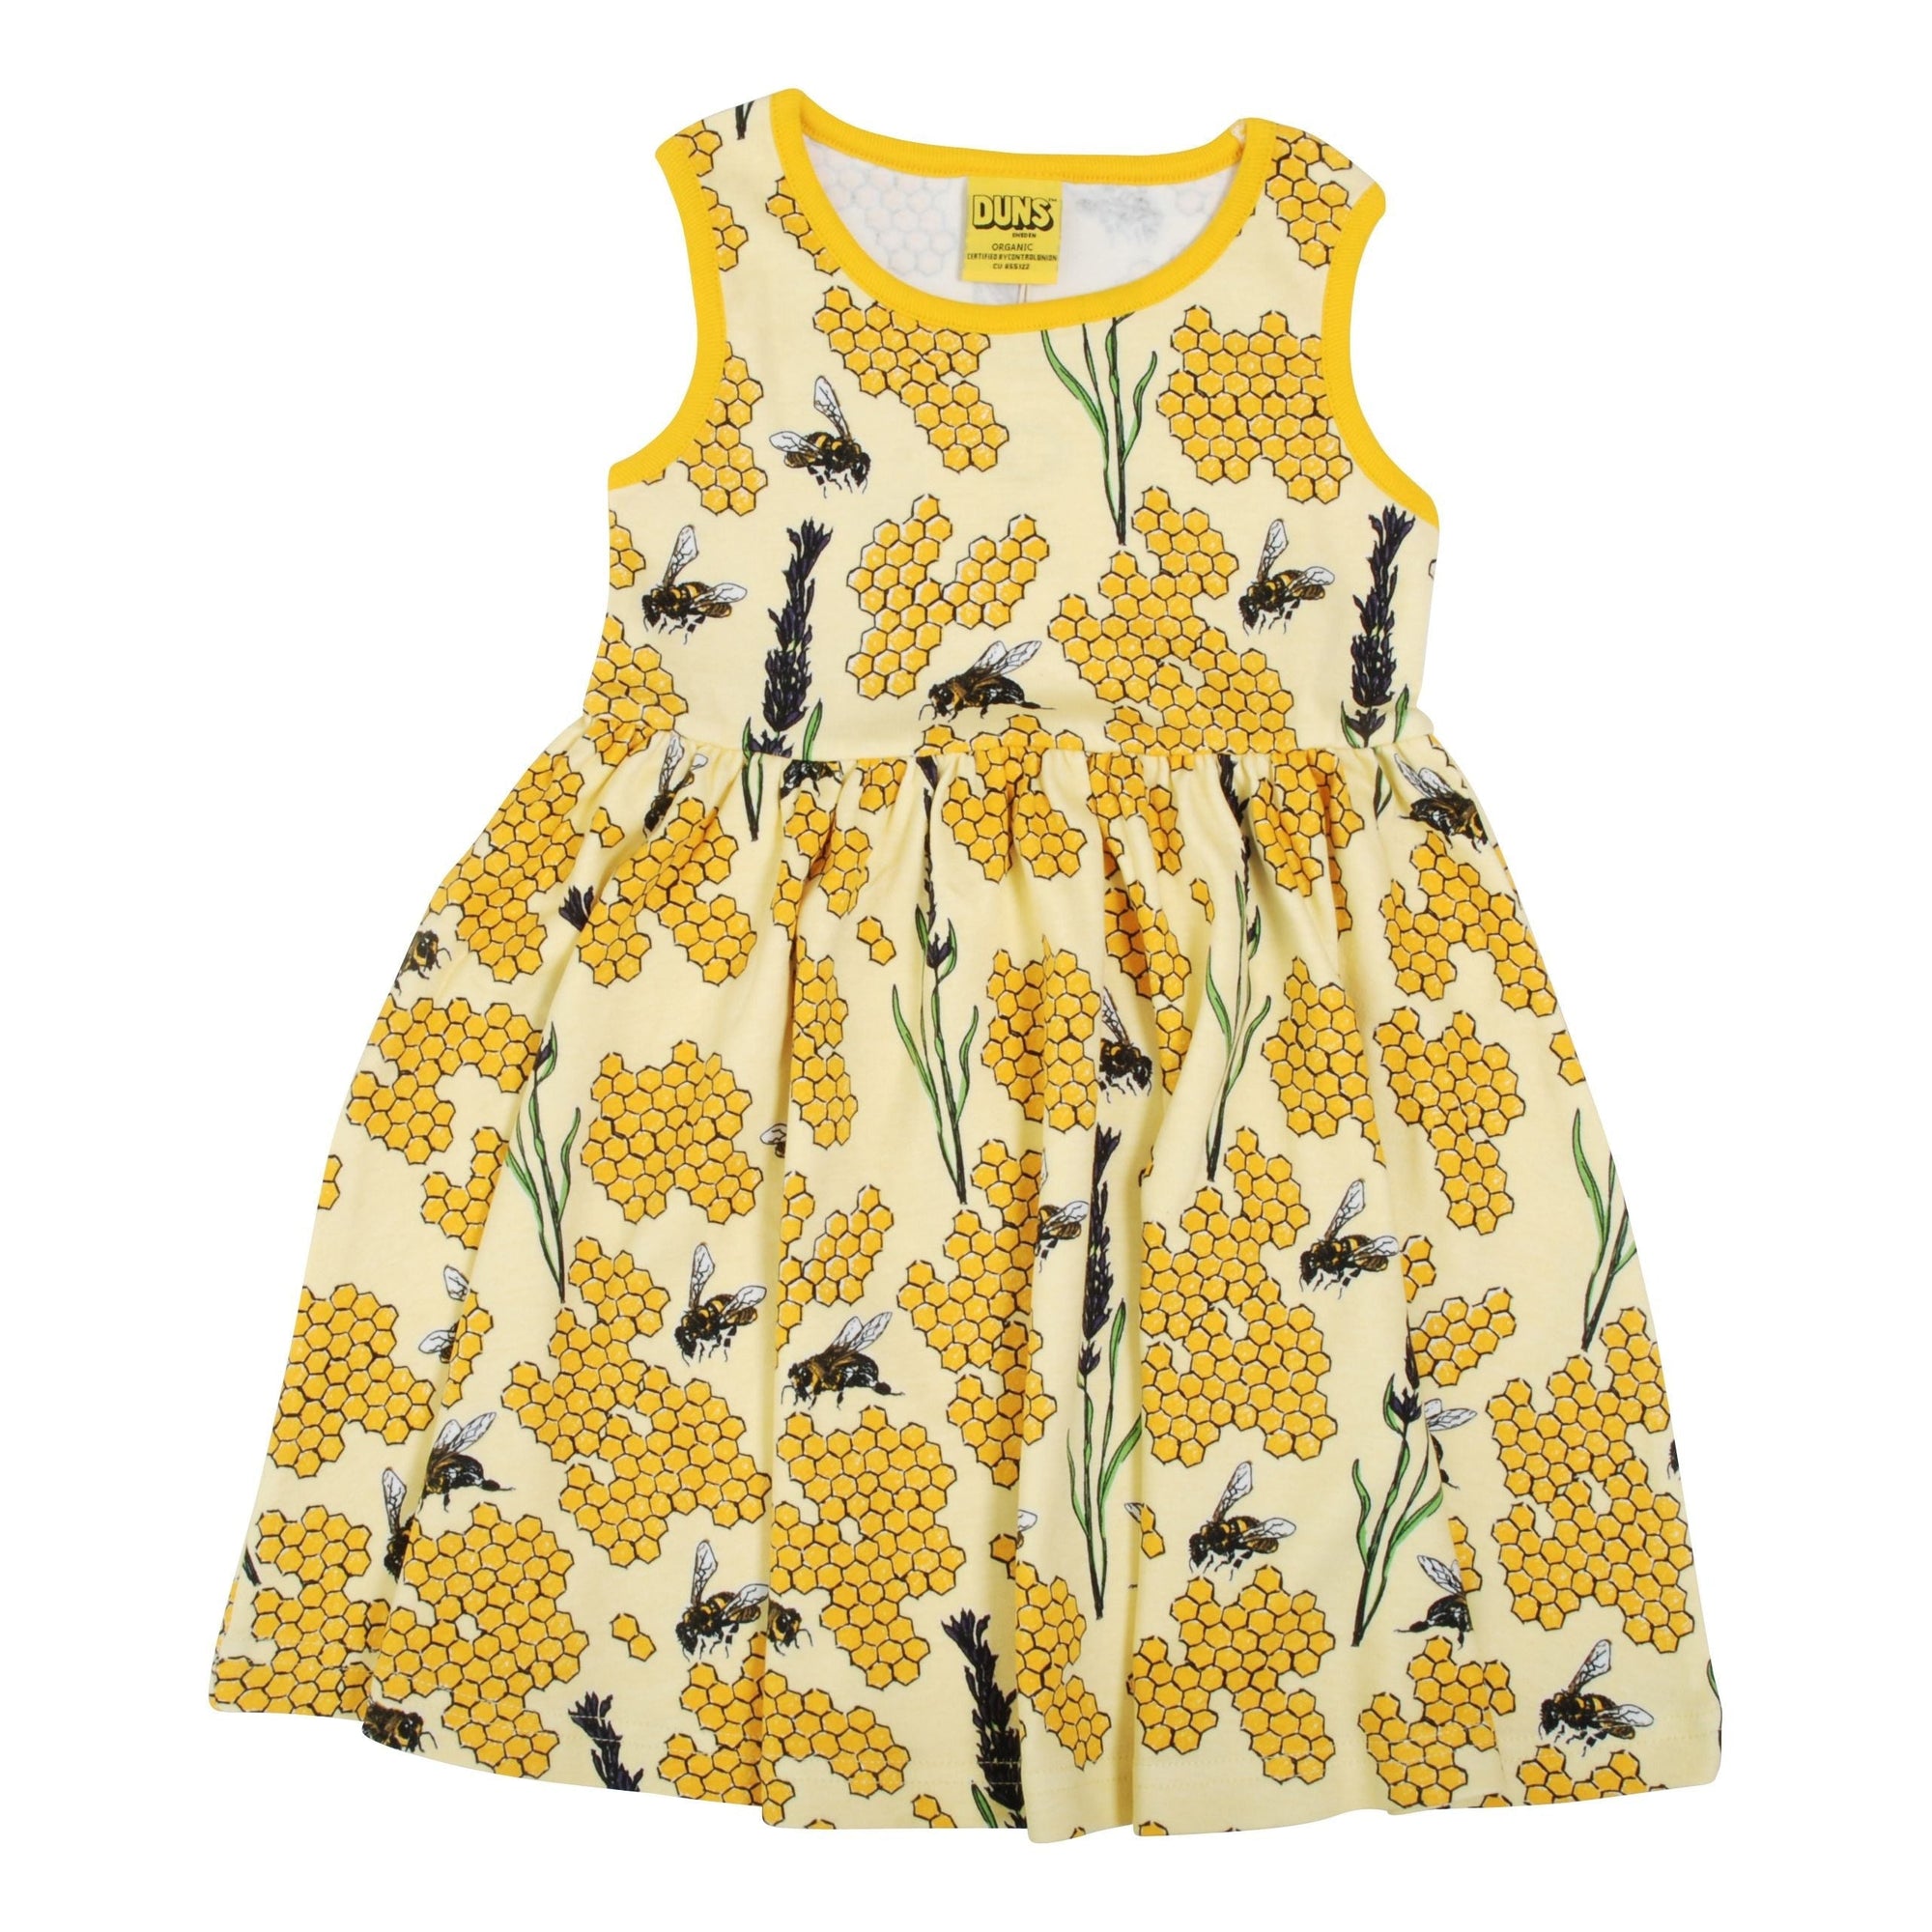 Bee - Yellow Sleeveless Dress With Gathered Skirt - 2 Left Size 10-11 & 12-13 years-Duns Sweden-Modern Rascals